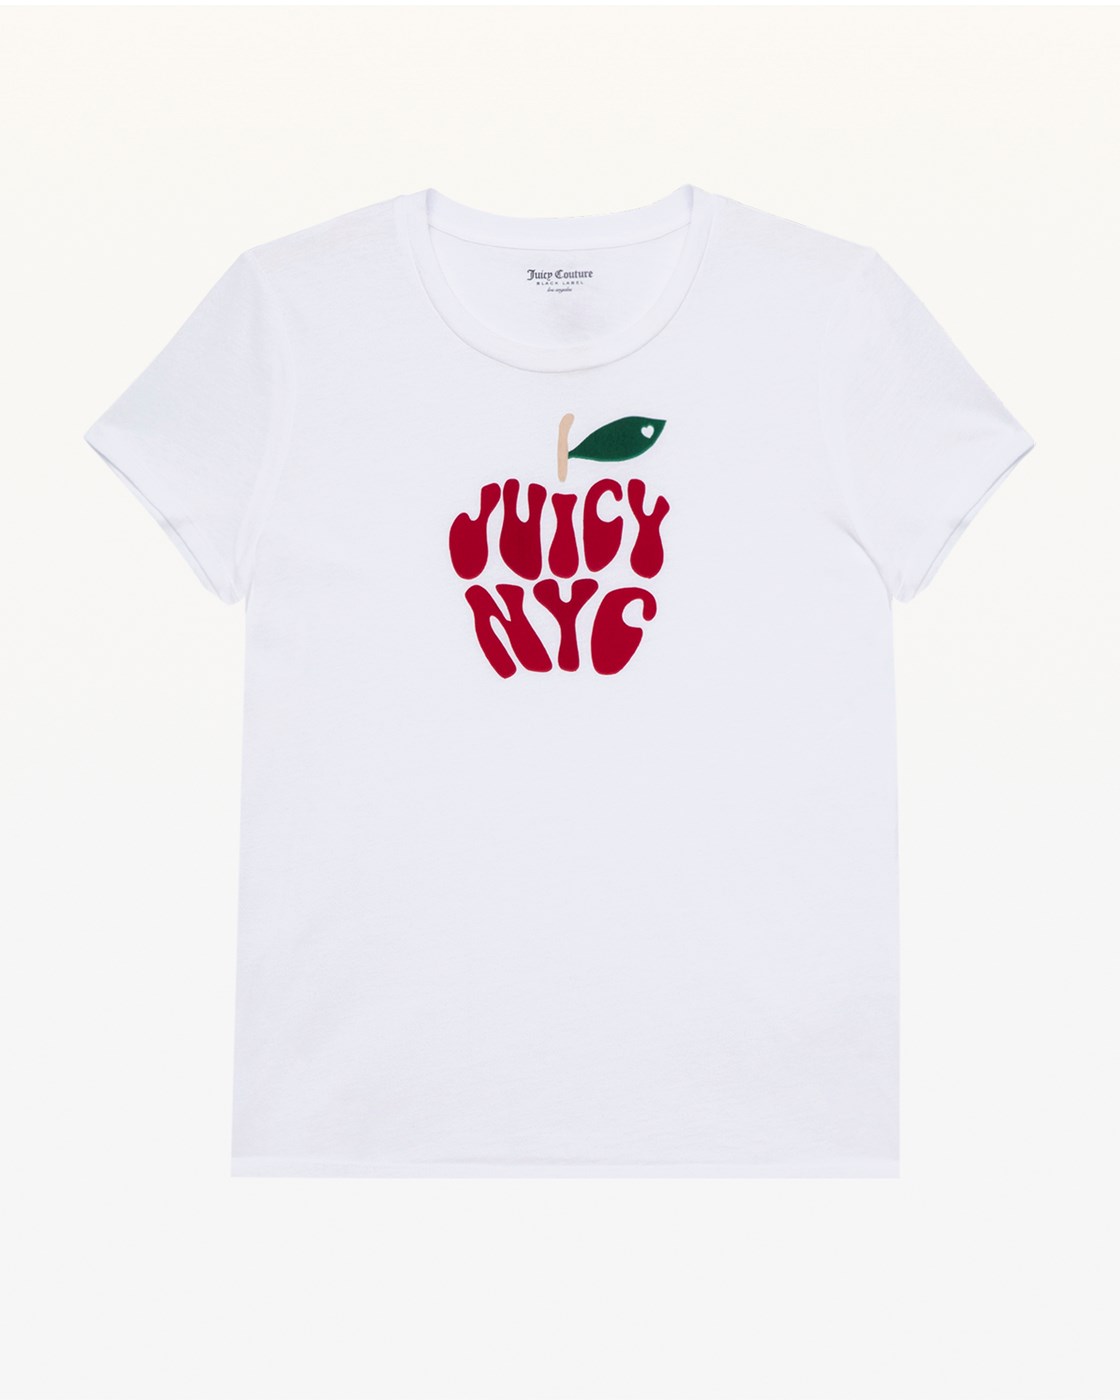 Juicy Couture NYC Tee